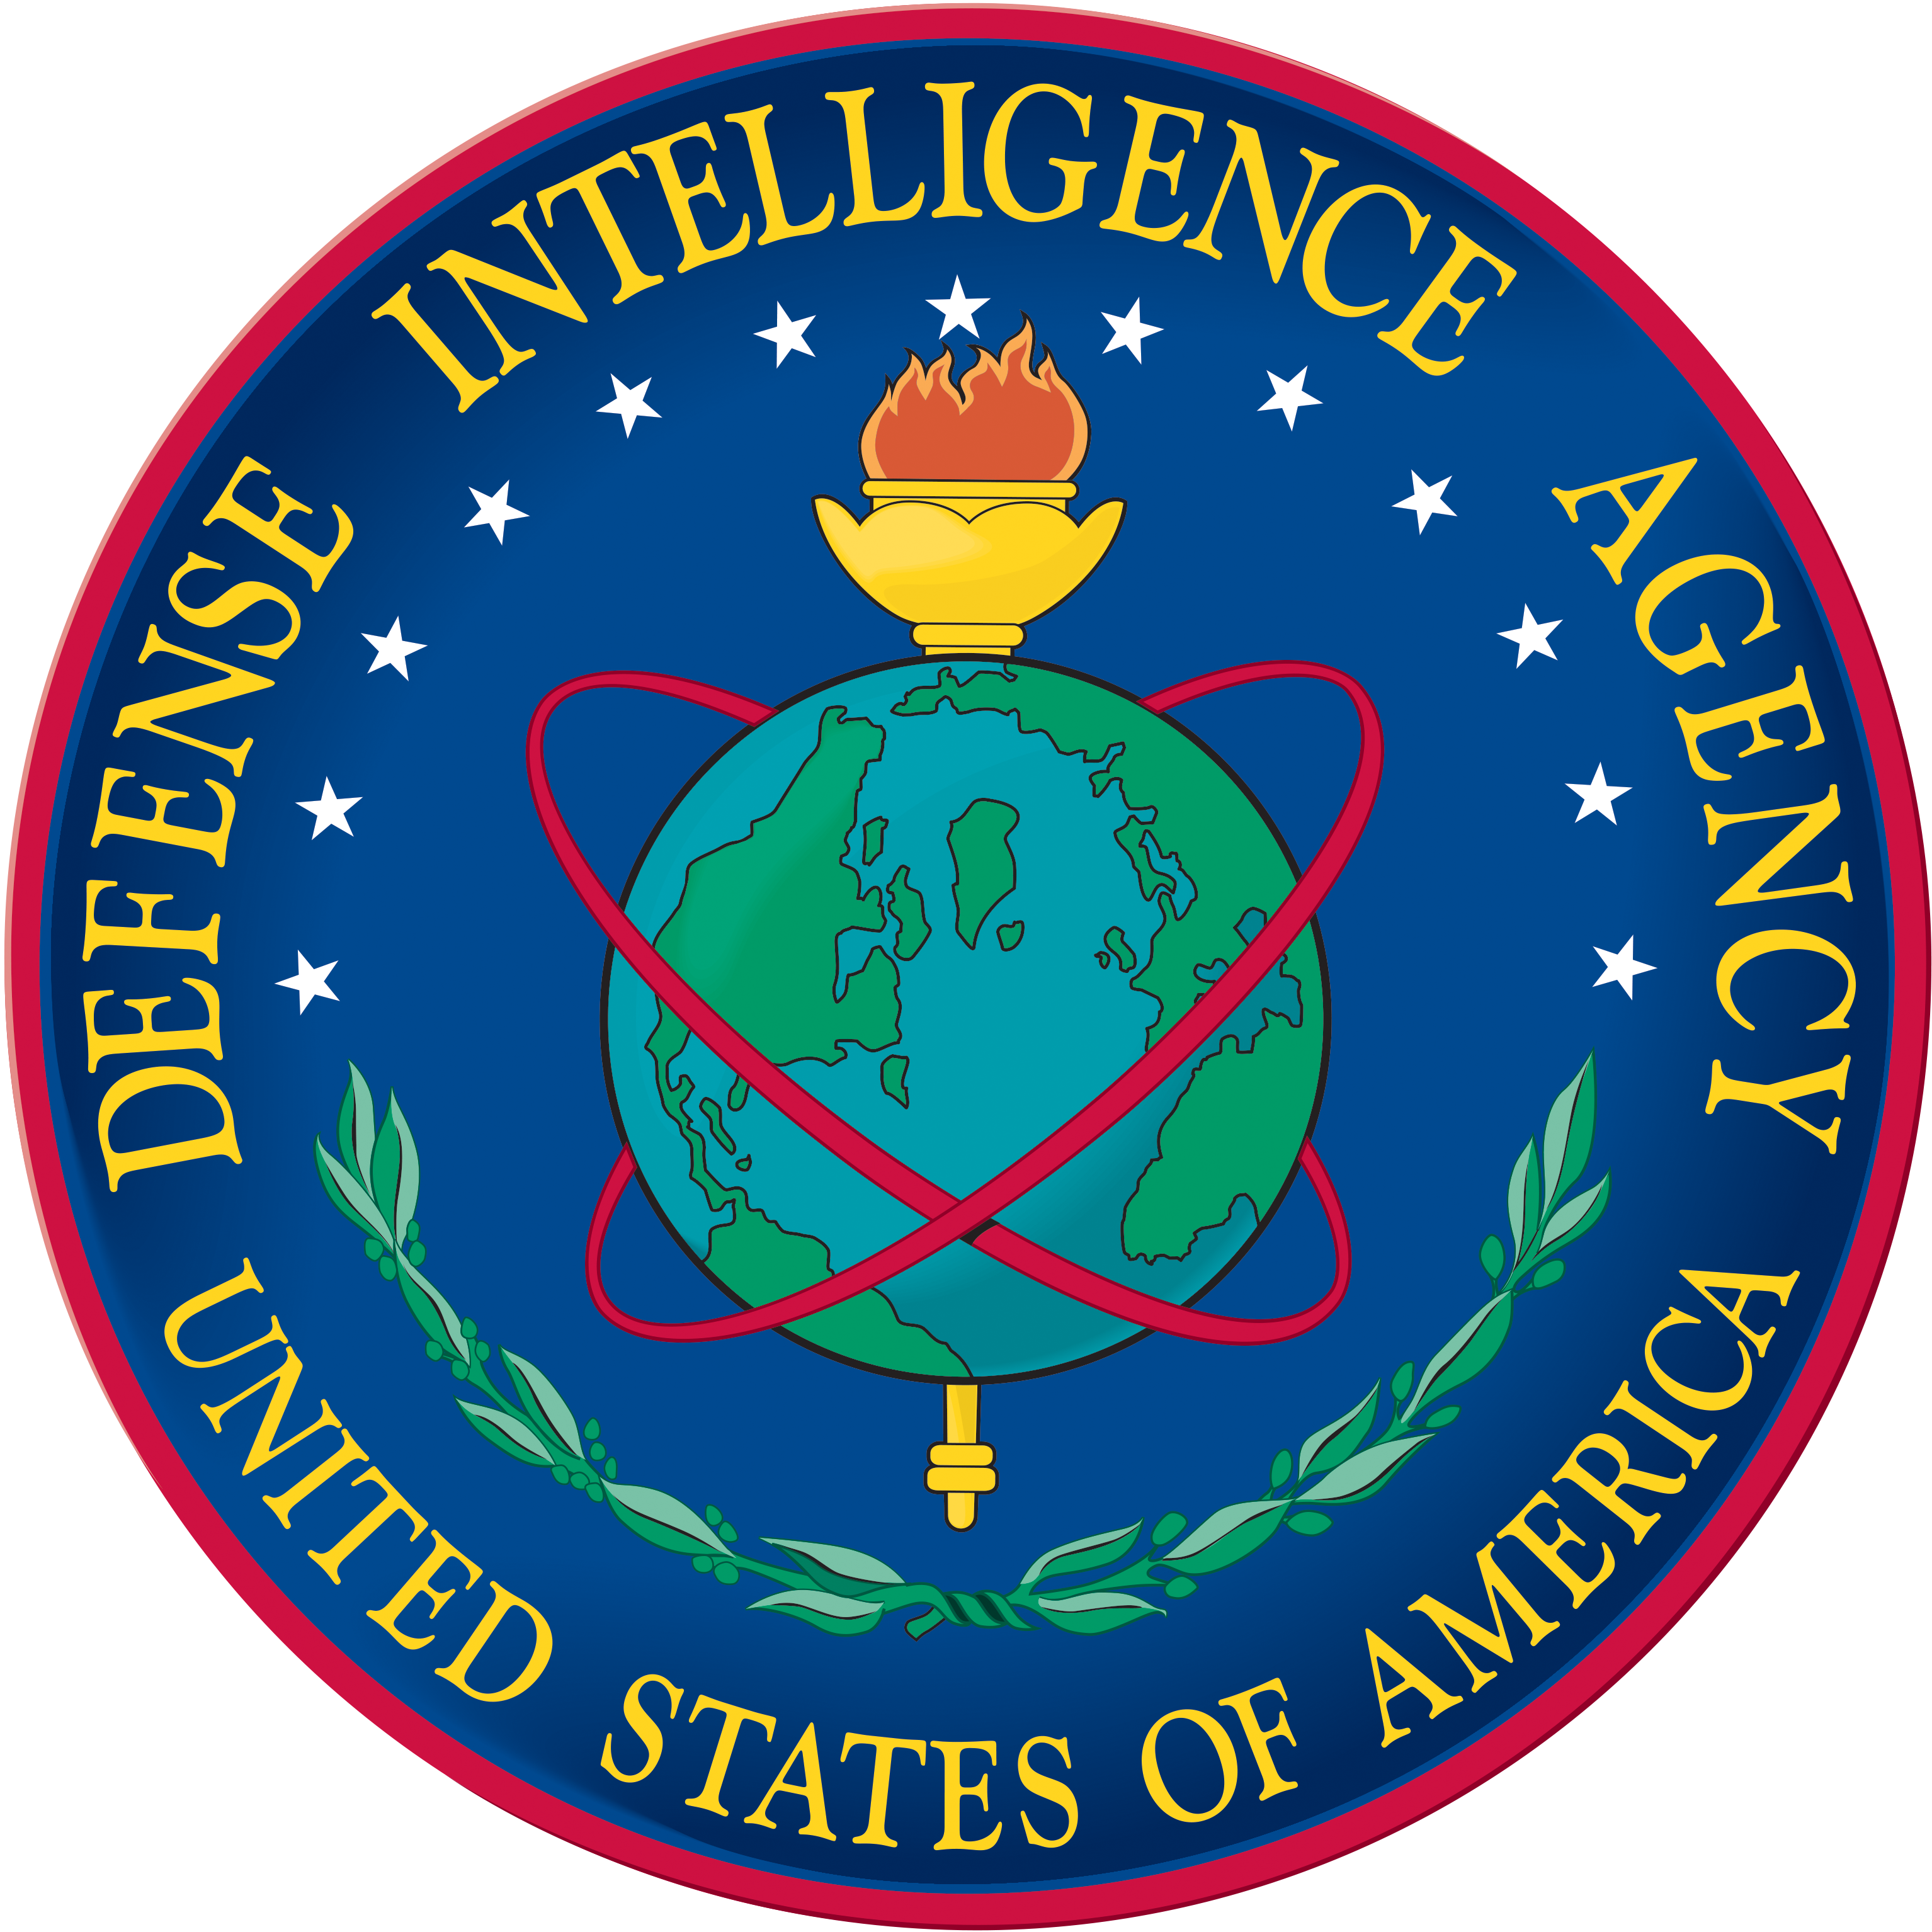 Image of the D-I-A Seal.